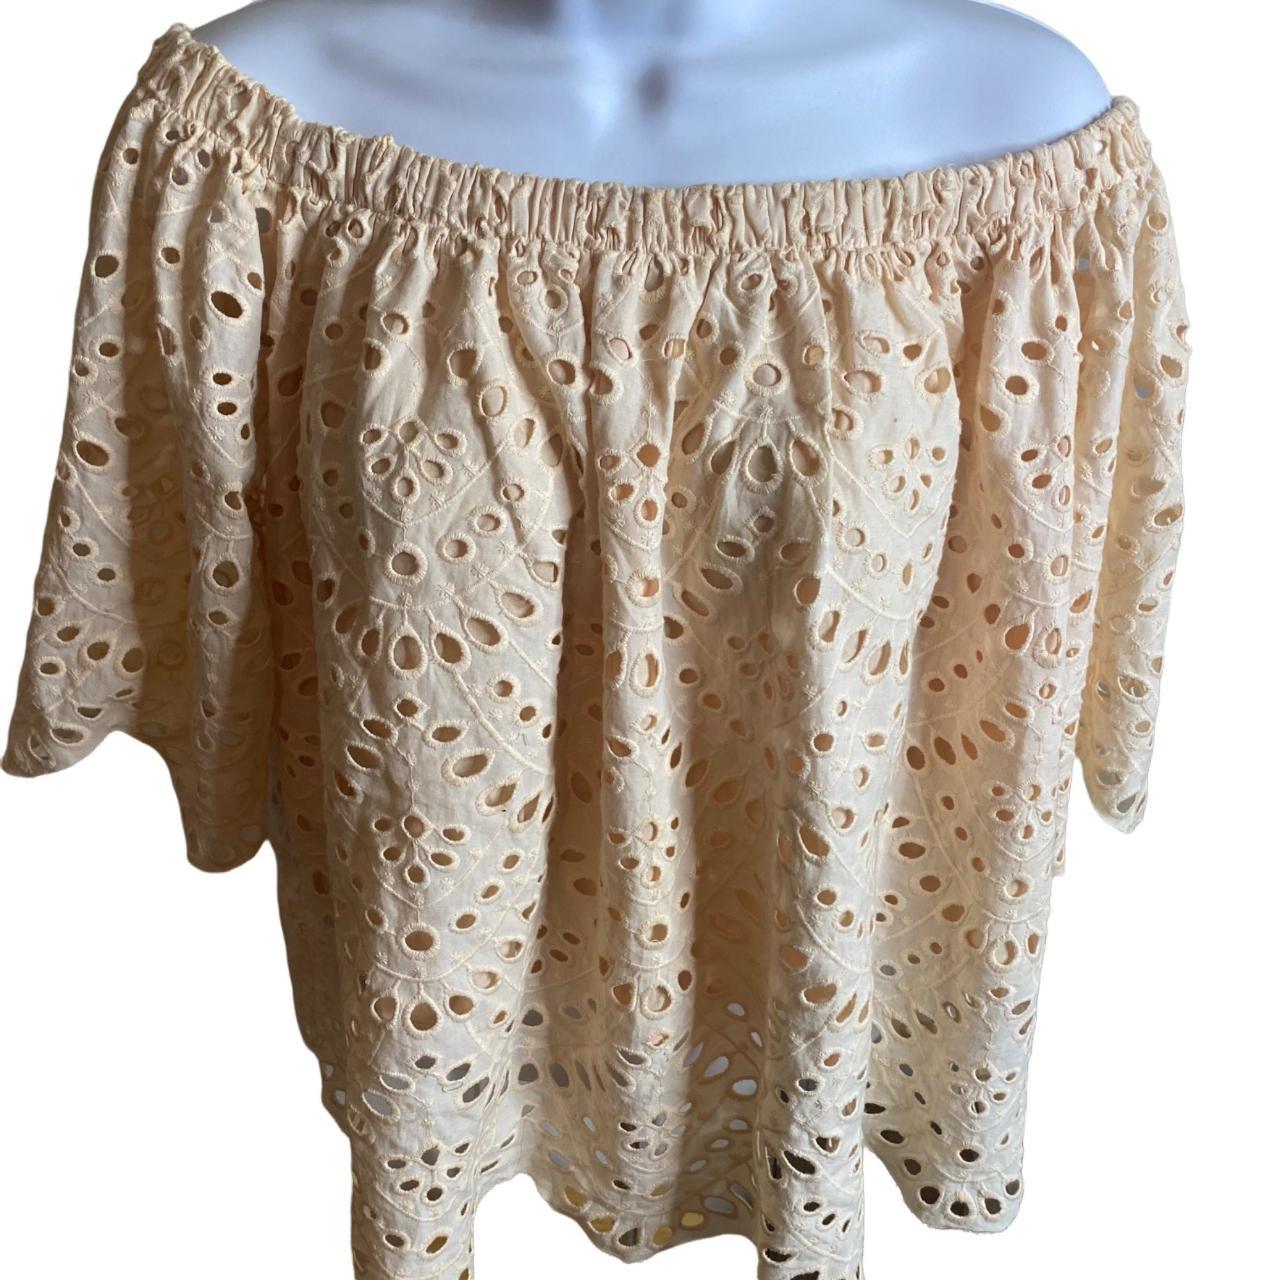 Product Image 4 - MINISTRY OF STYLE TOP

EYELET

PEACH IN